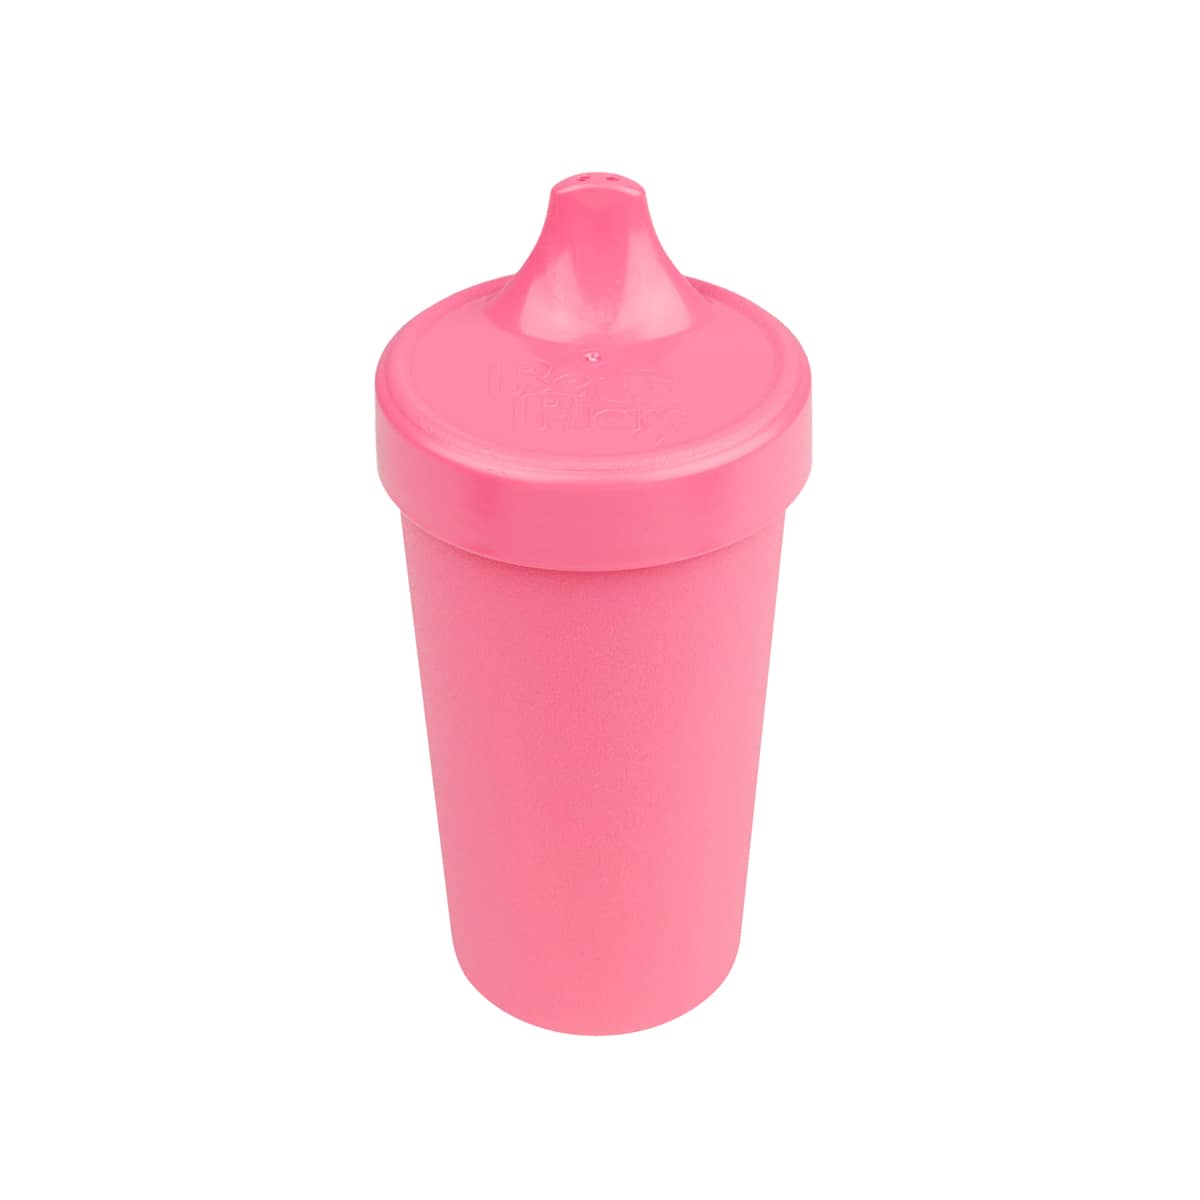 Re-Play Recycled No-Spill Sippy Cup - Bright Pink